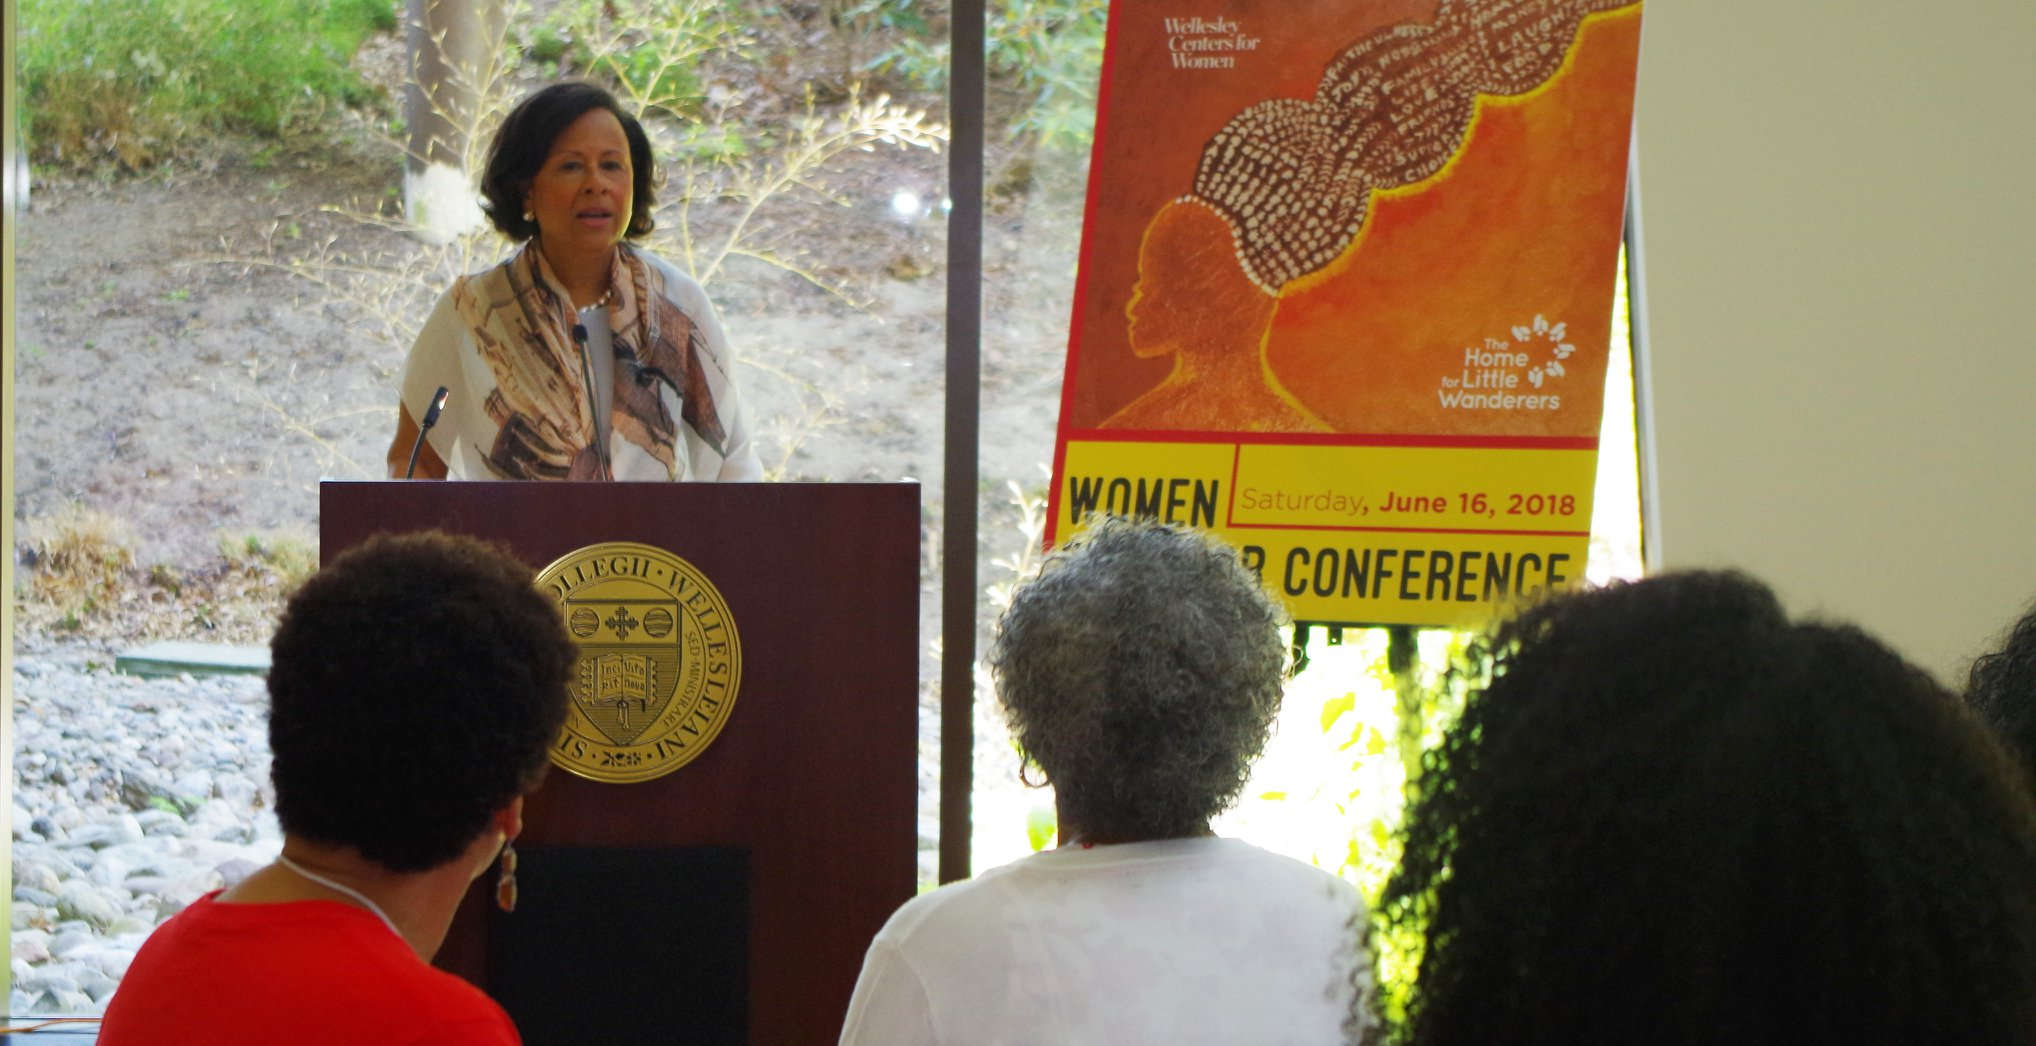 Wellesley College President Dr. Paula Johnson speaks at Women of Color Conference